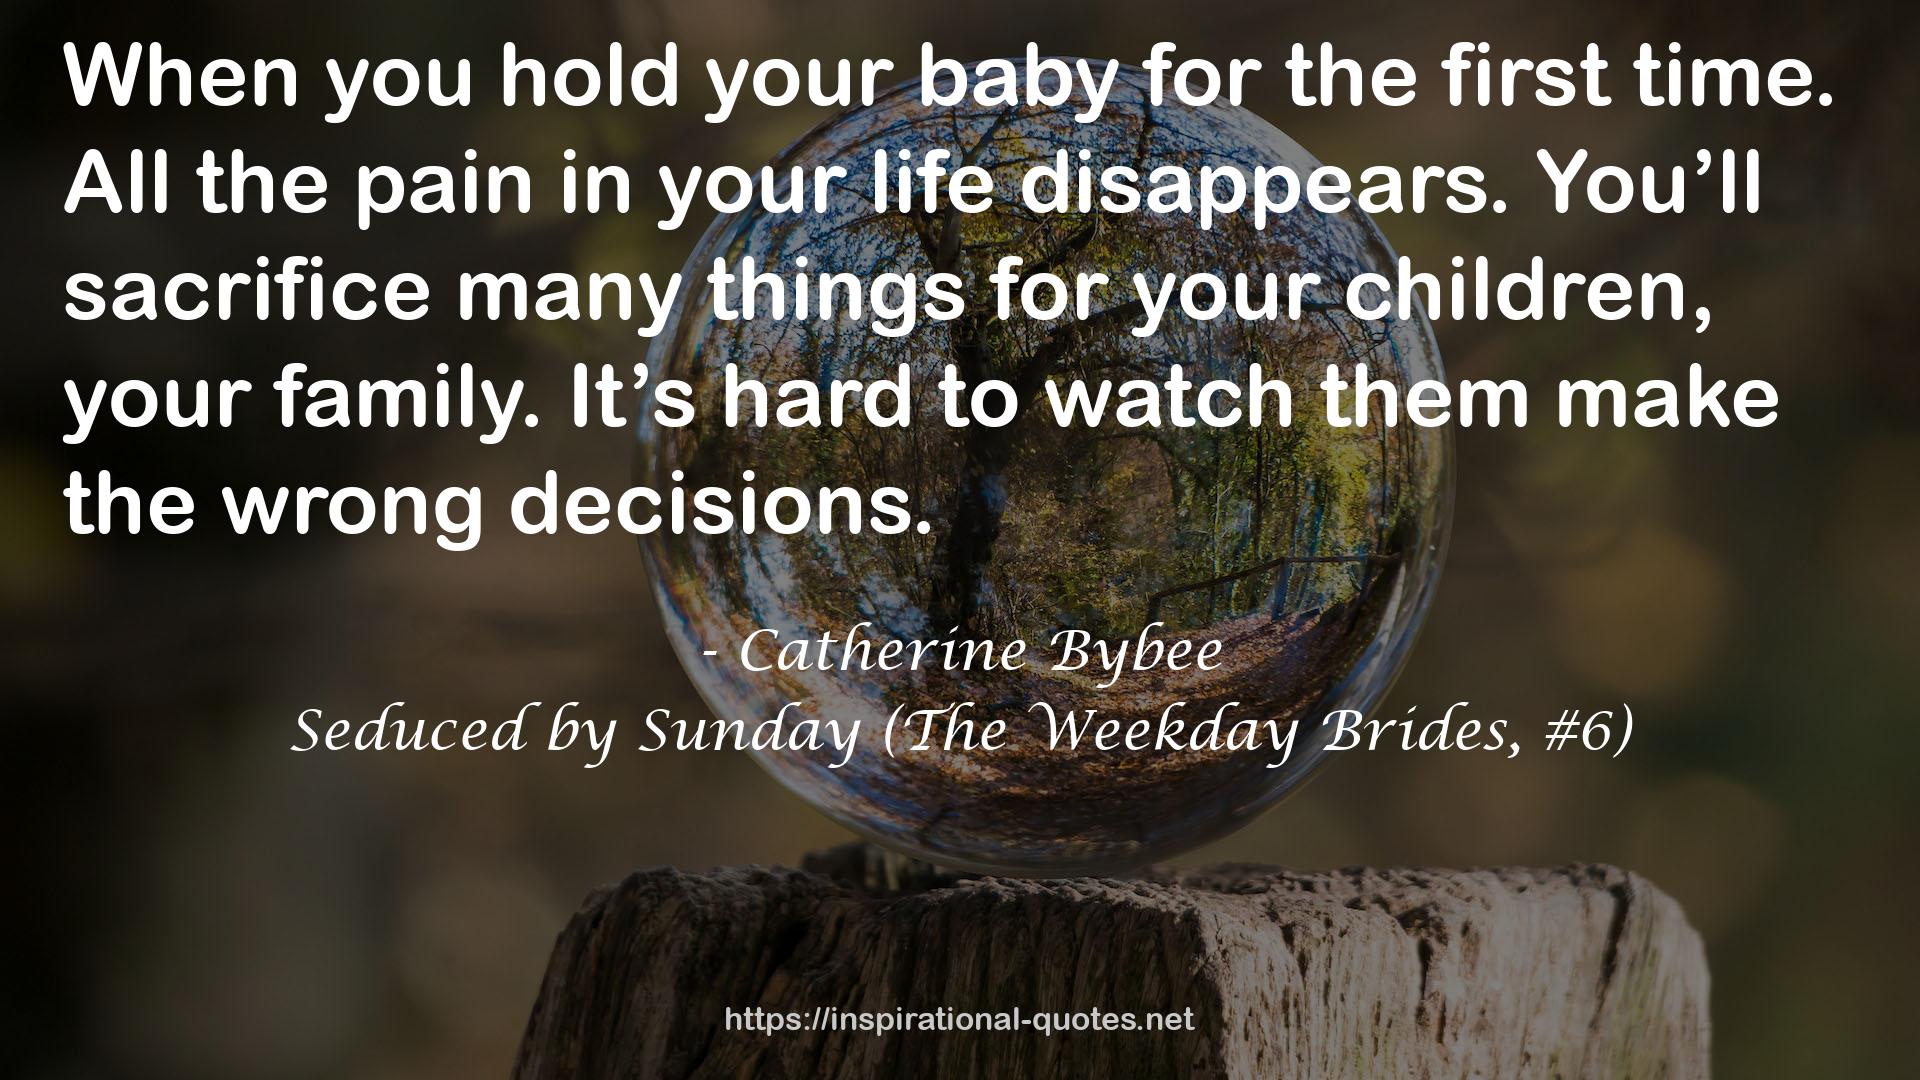 Seduced by Sunday (The Weekday Brides, #6) QUOTES